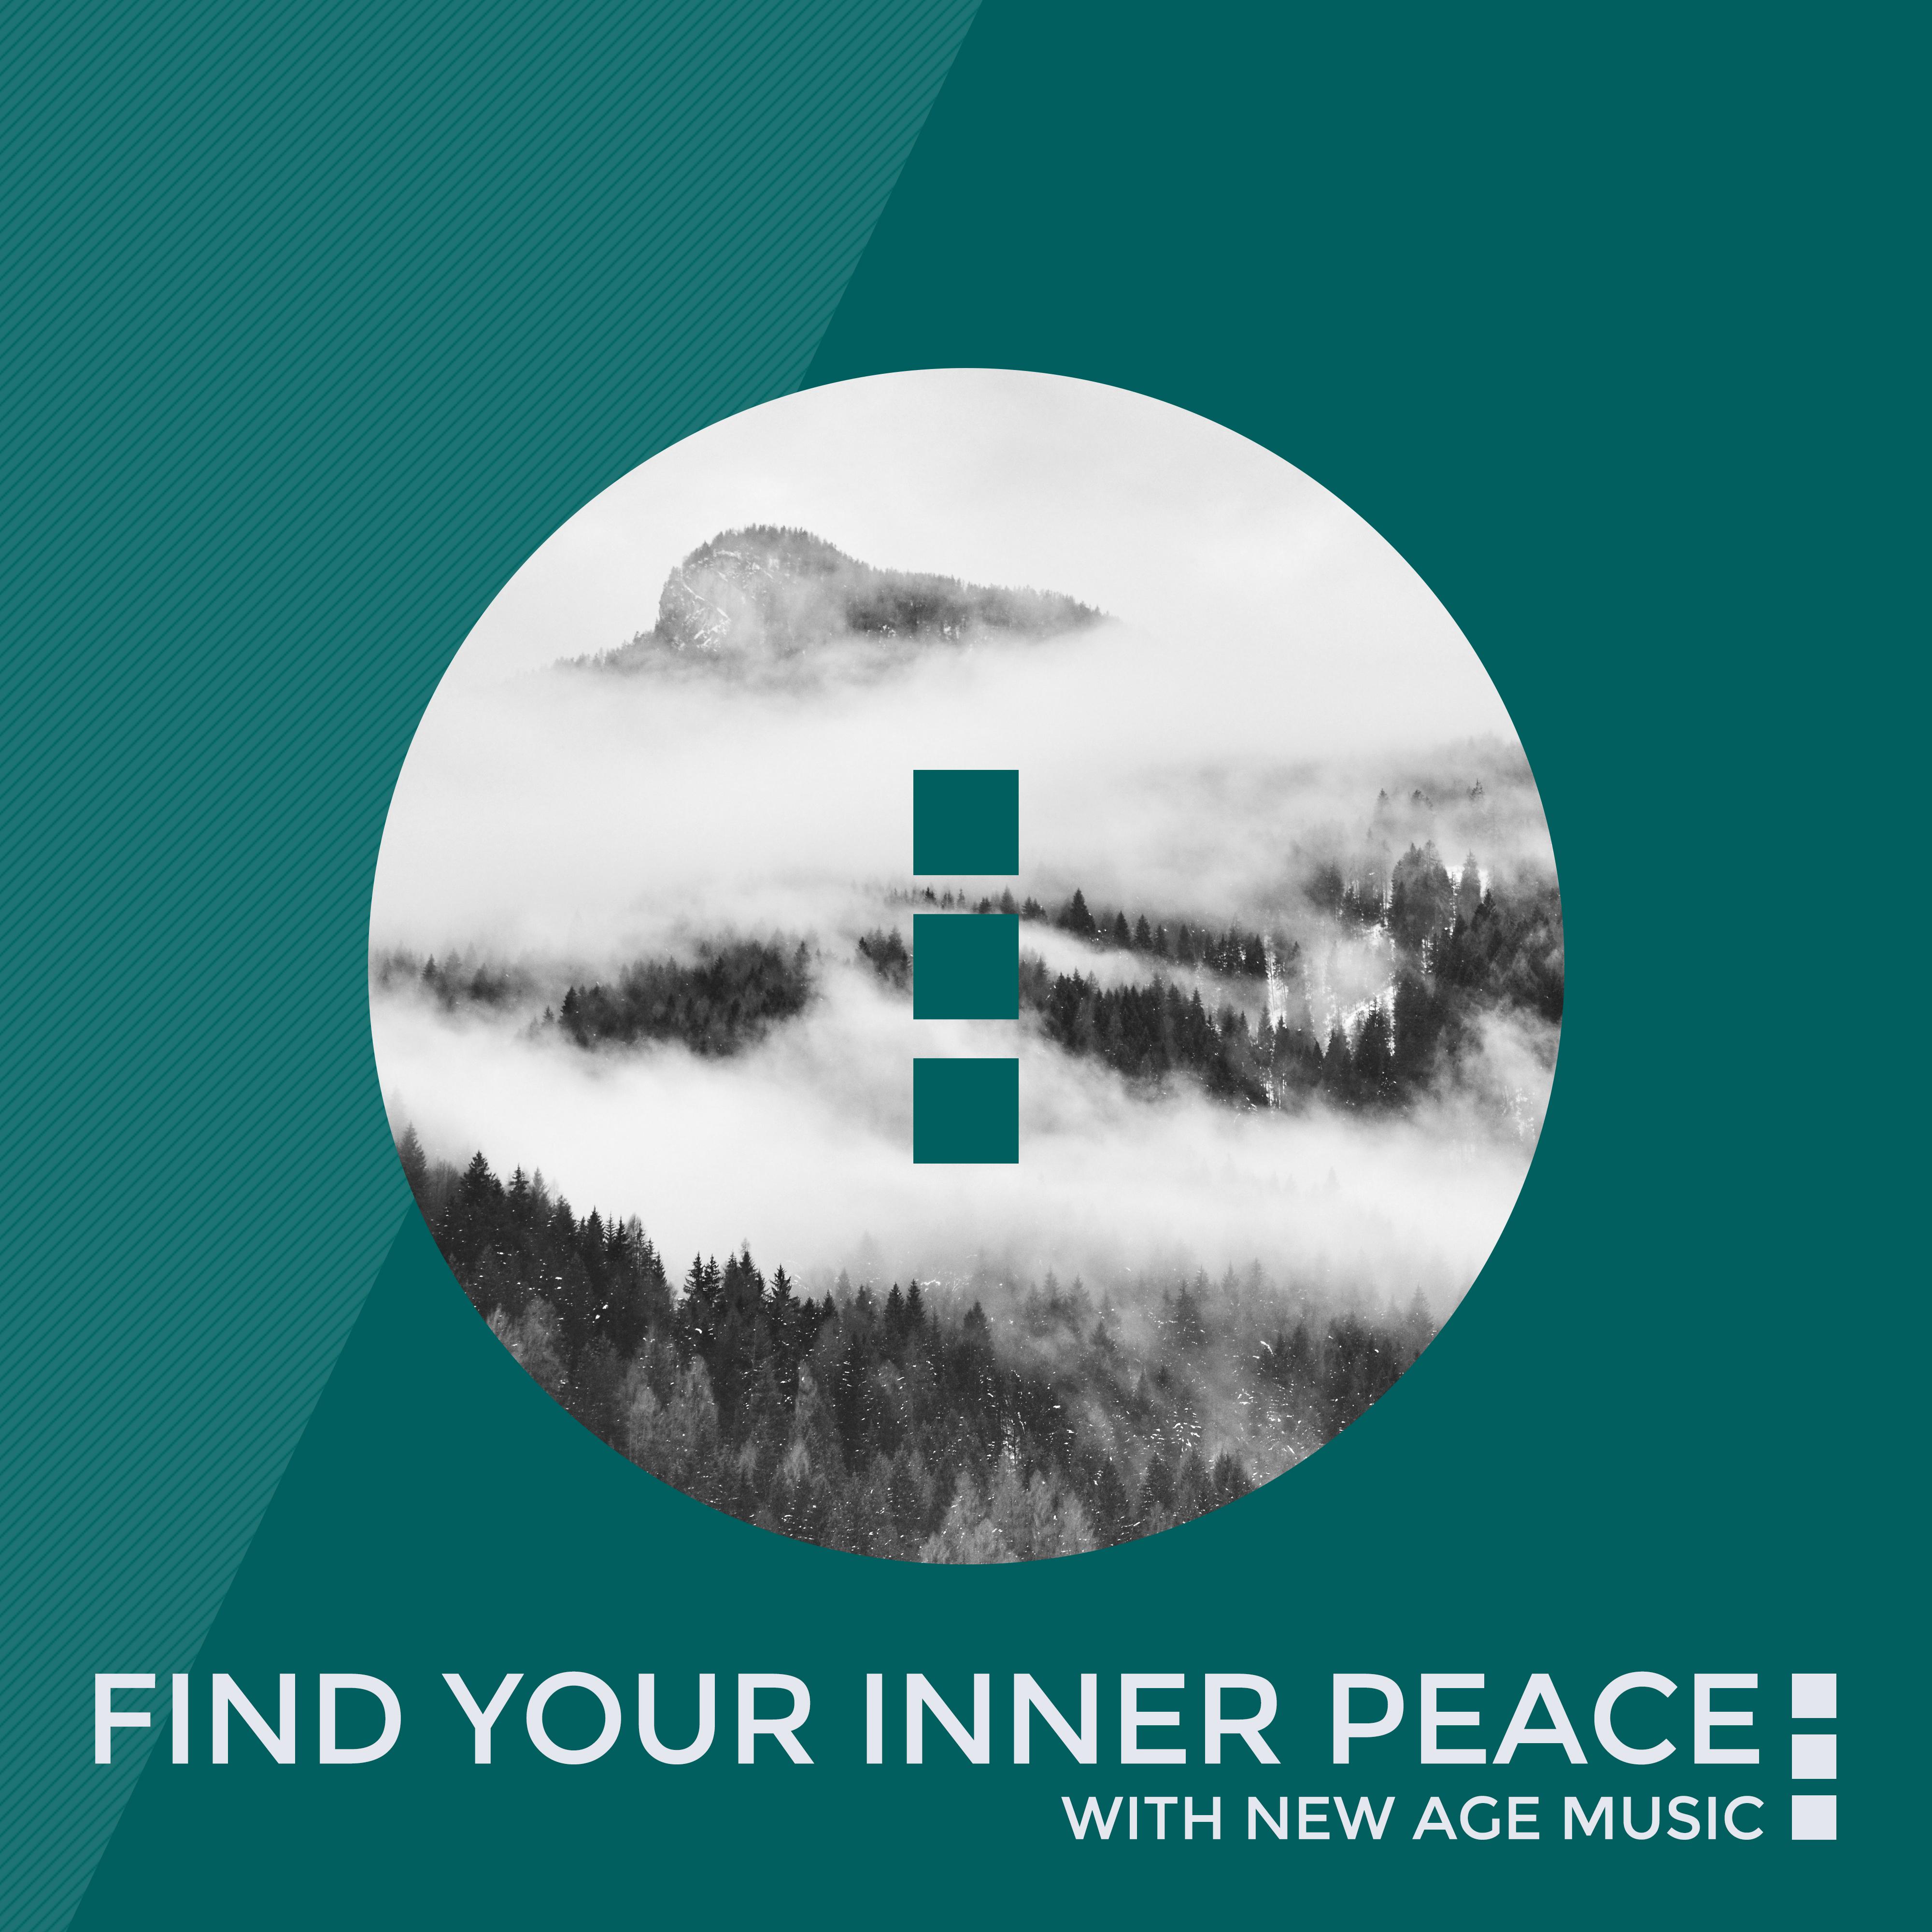 Find Your Inner Peace with New Age Music